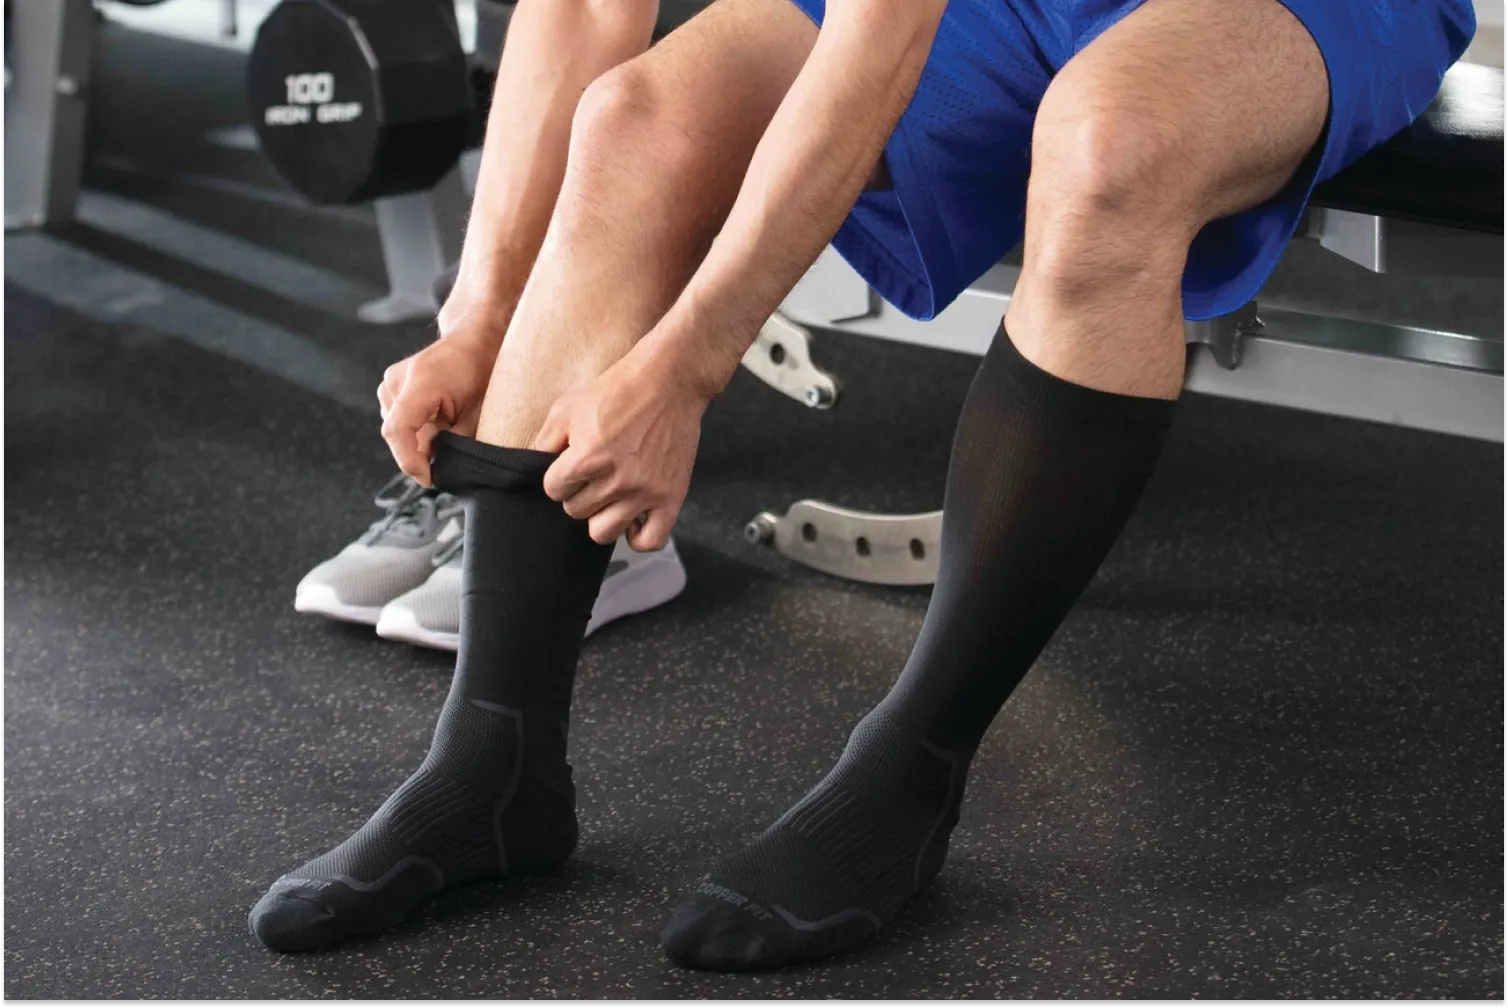 Easy-On Compression Socks for the Elderly - Copper Fit